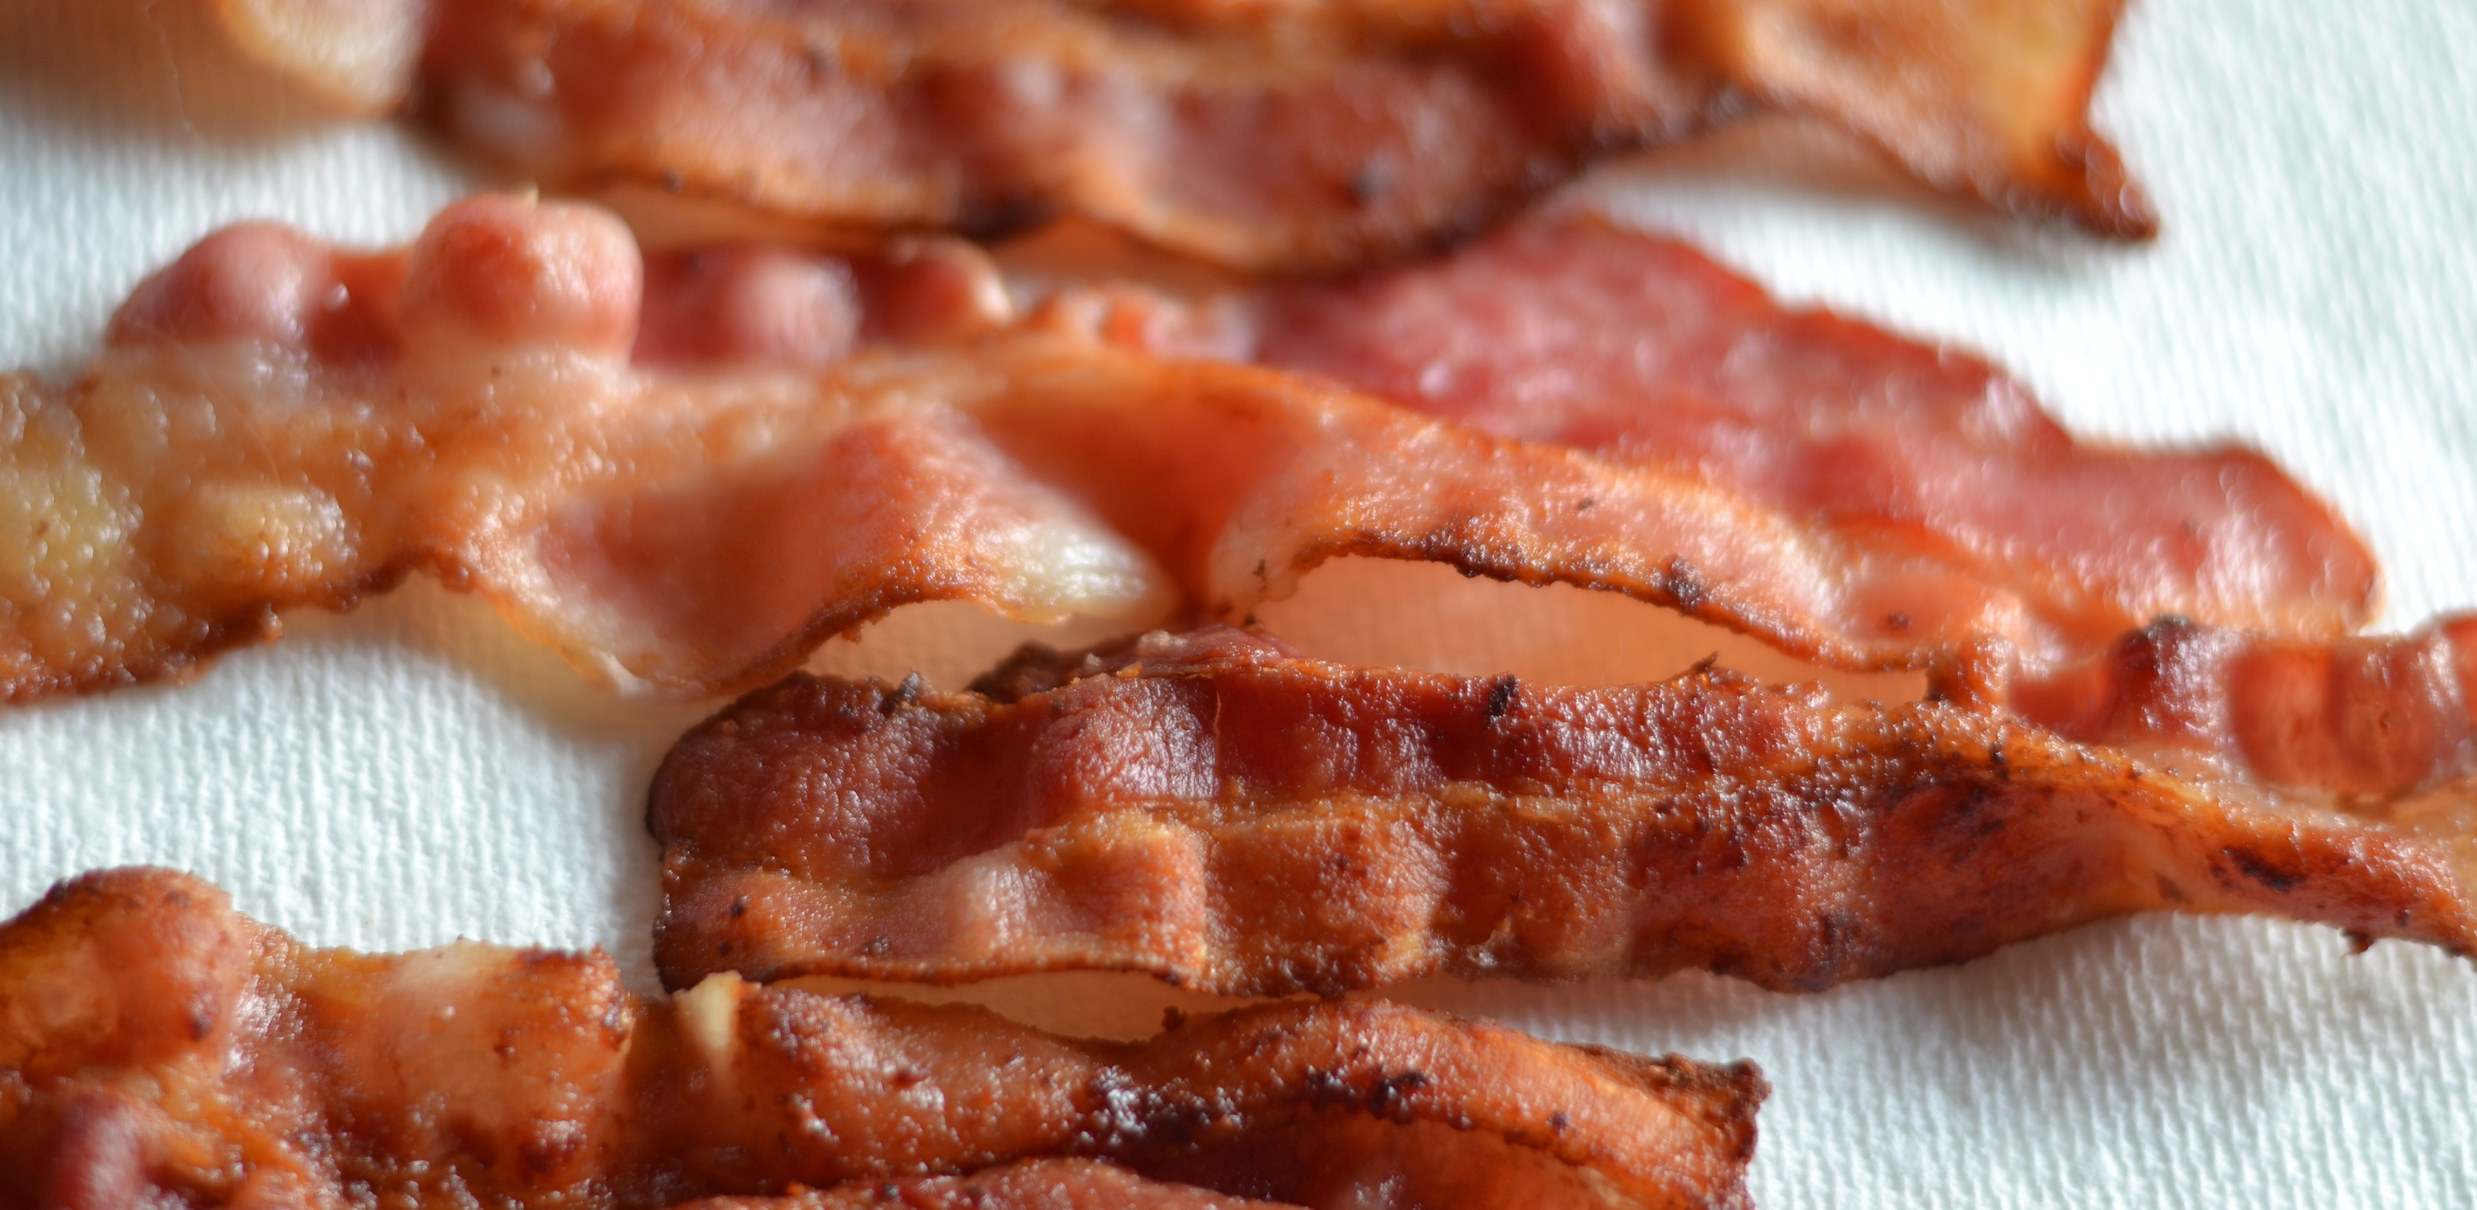 A close-up of fried bacon on paper towel